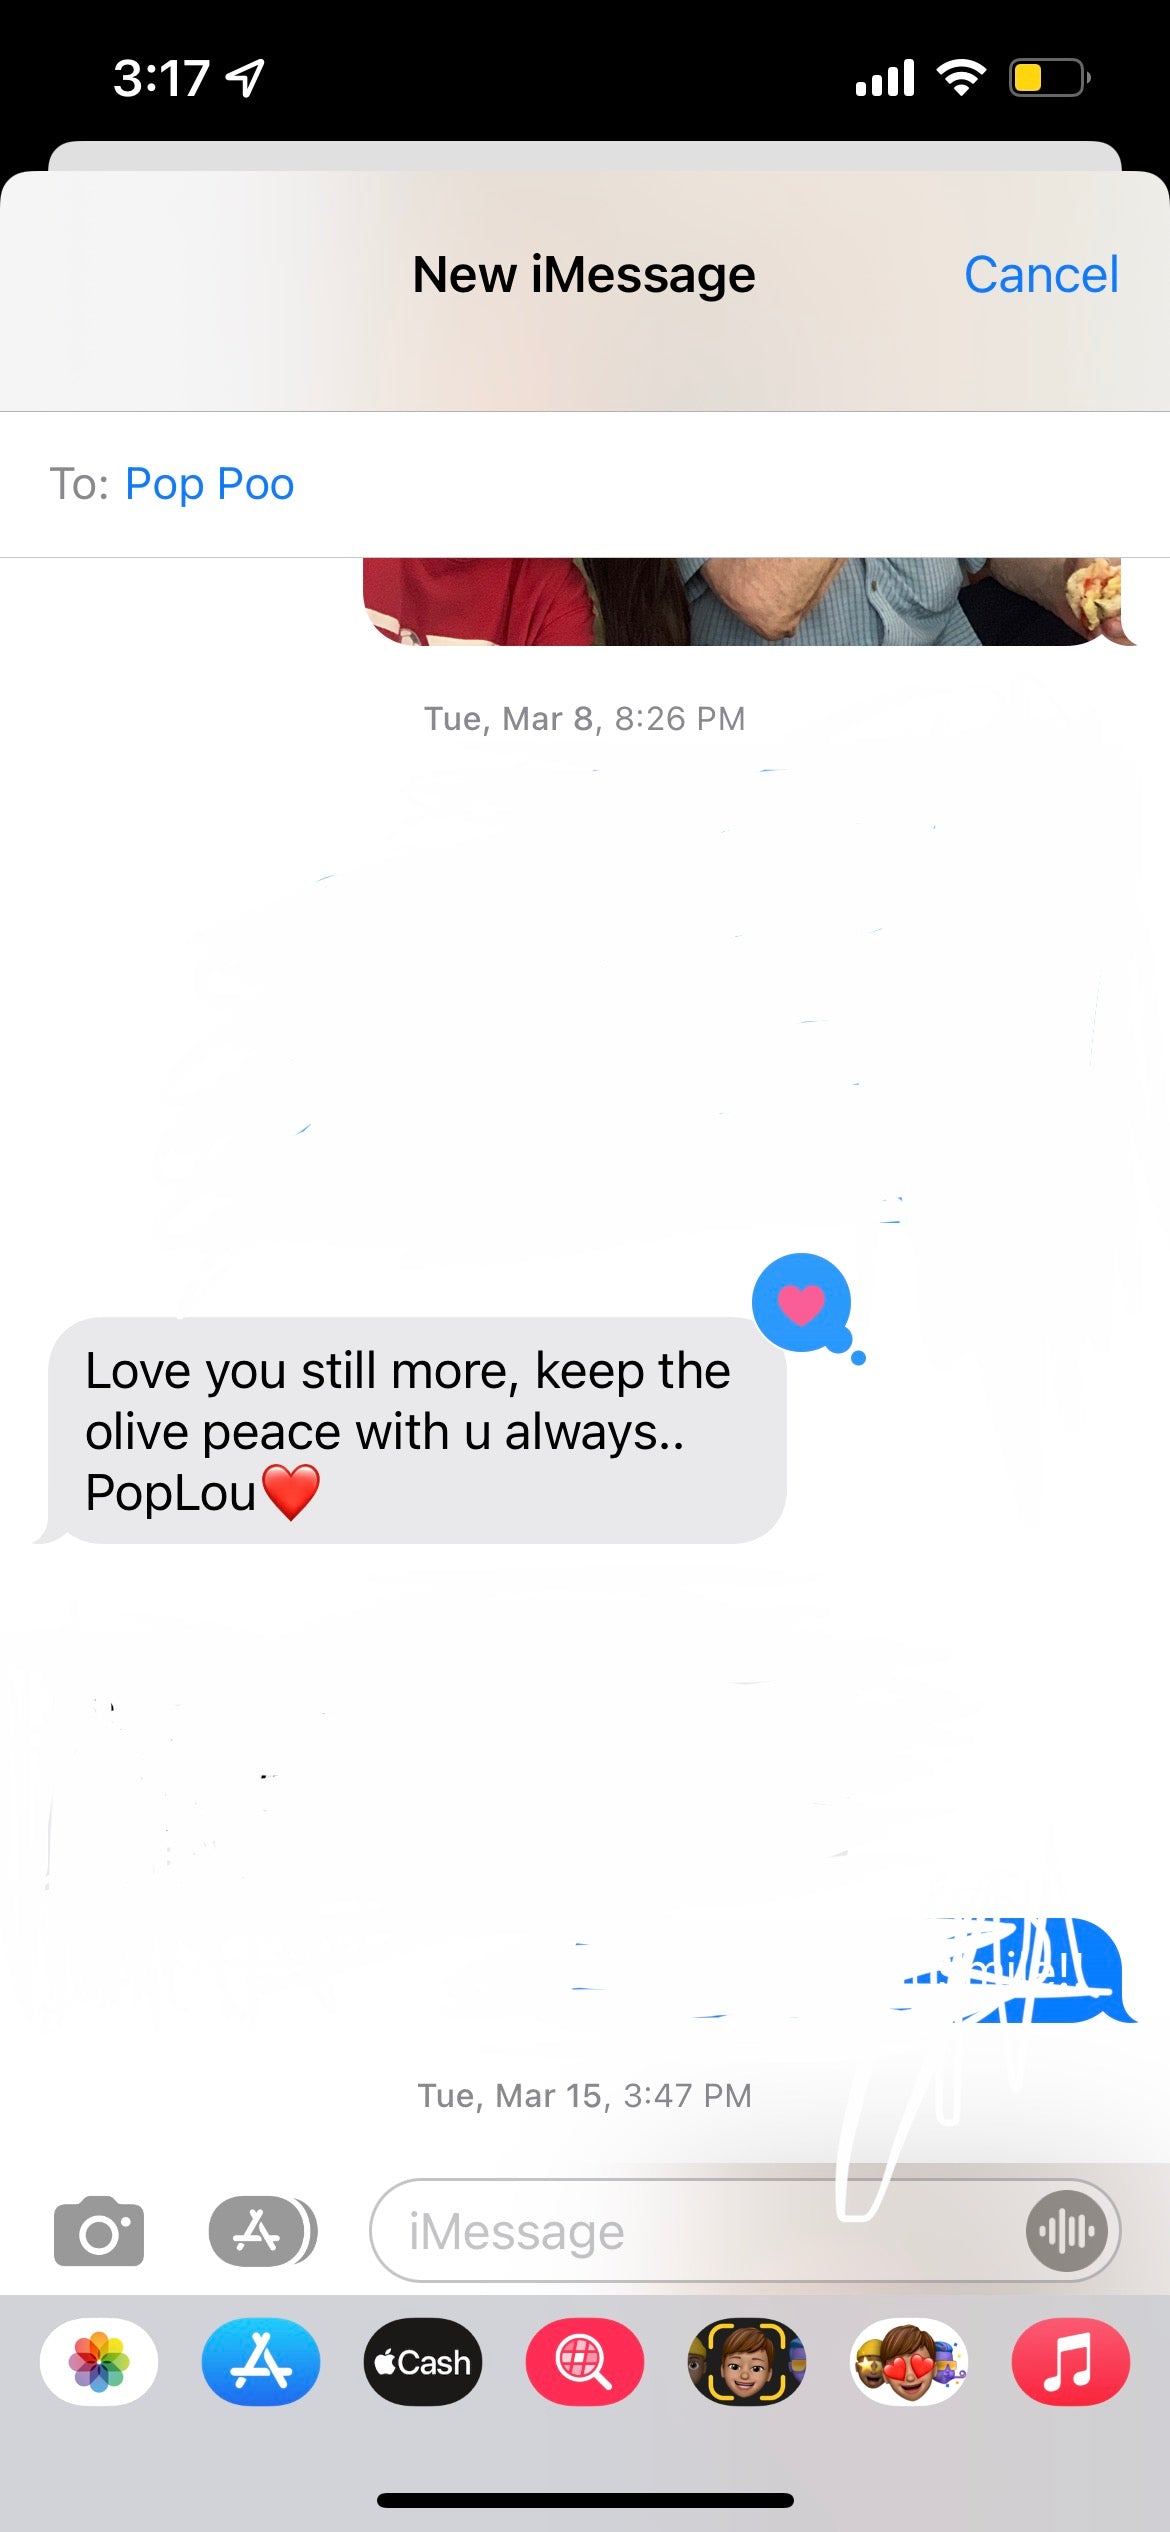 Texts exchanged between Paige and her Grandfather, Popou. He says, "Love you still more, keep the olive peace with you always... PopLou. Photo credit to Paige DeAngelo